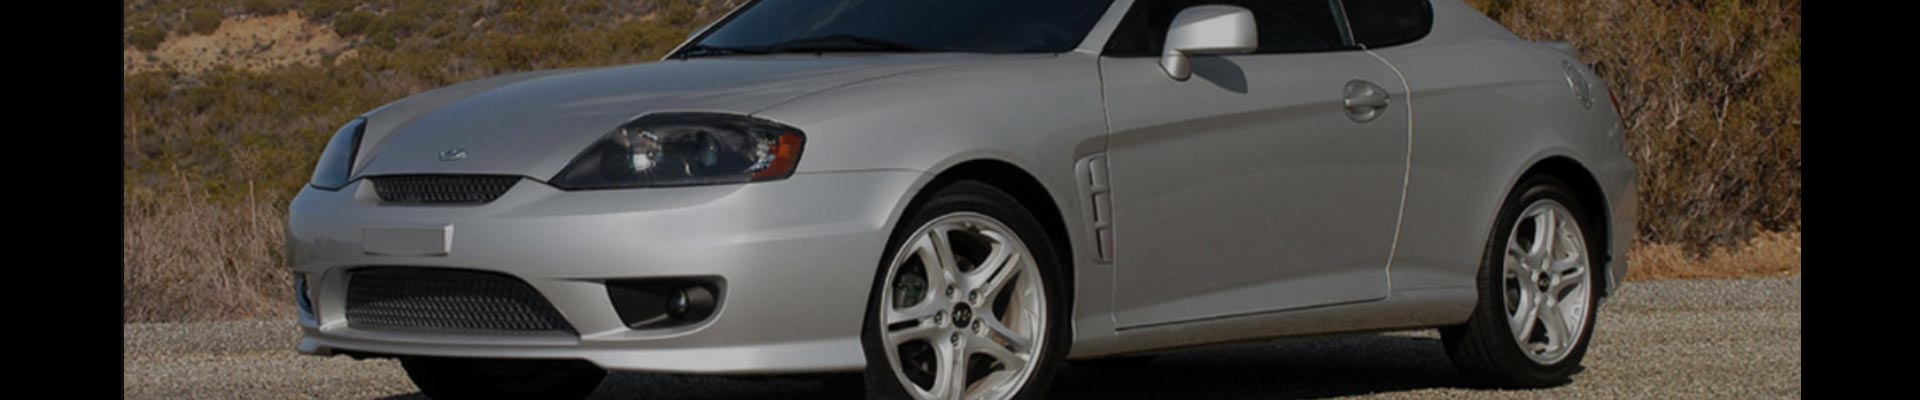 Shop Replacement and OEM Hyundai Tiburon Parts with Discounted Price on the Net